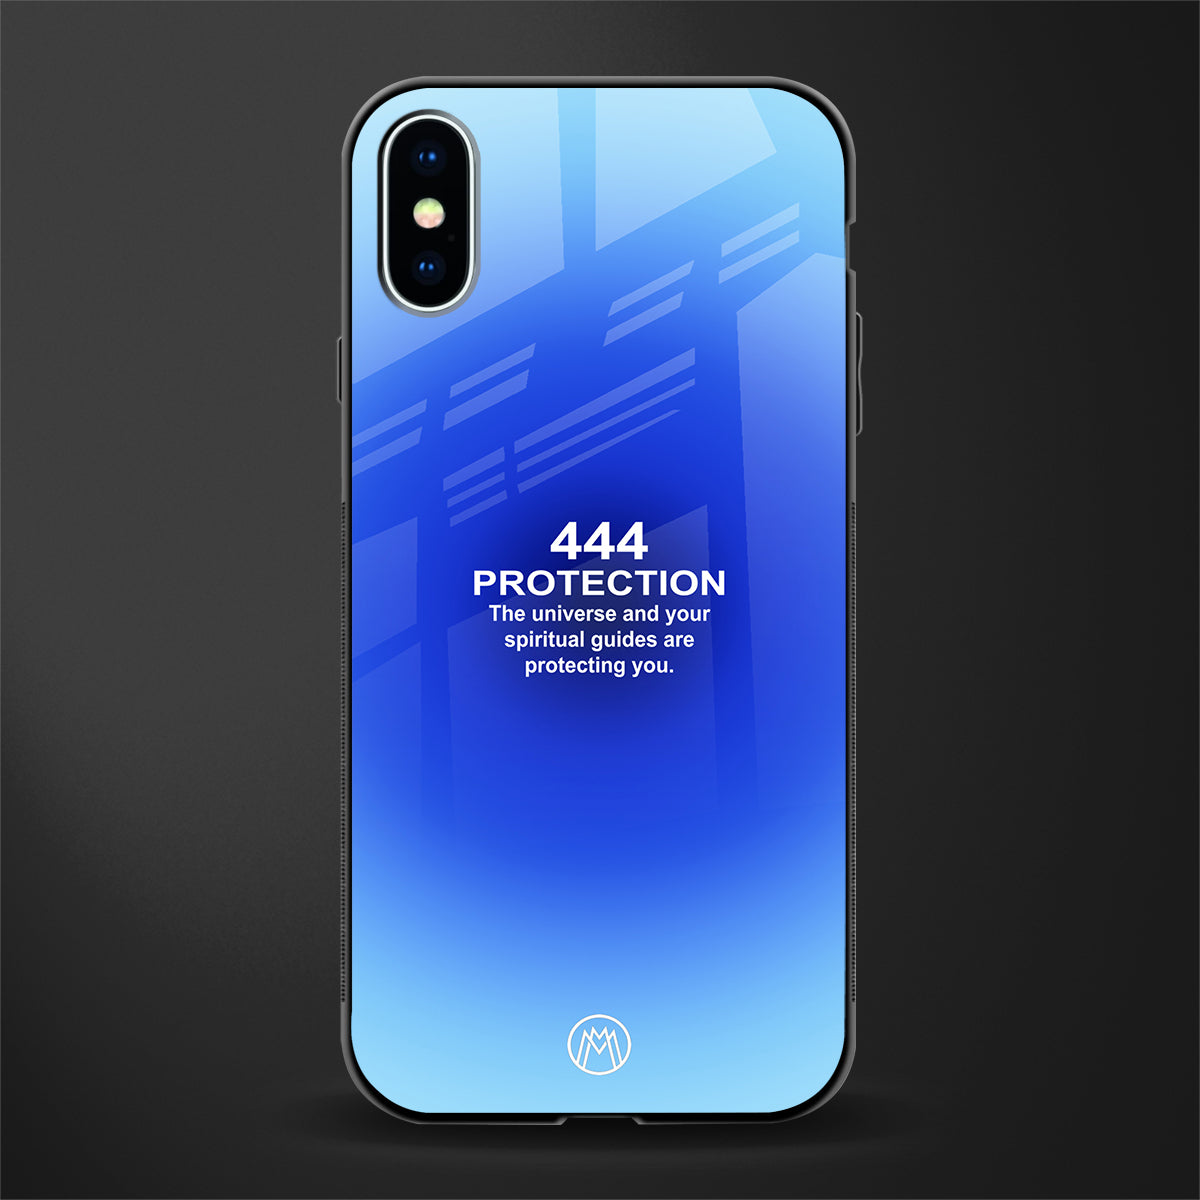 444 protection glass case for iphone xs image